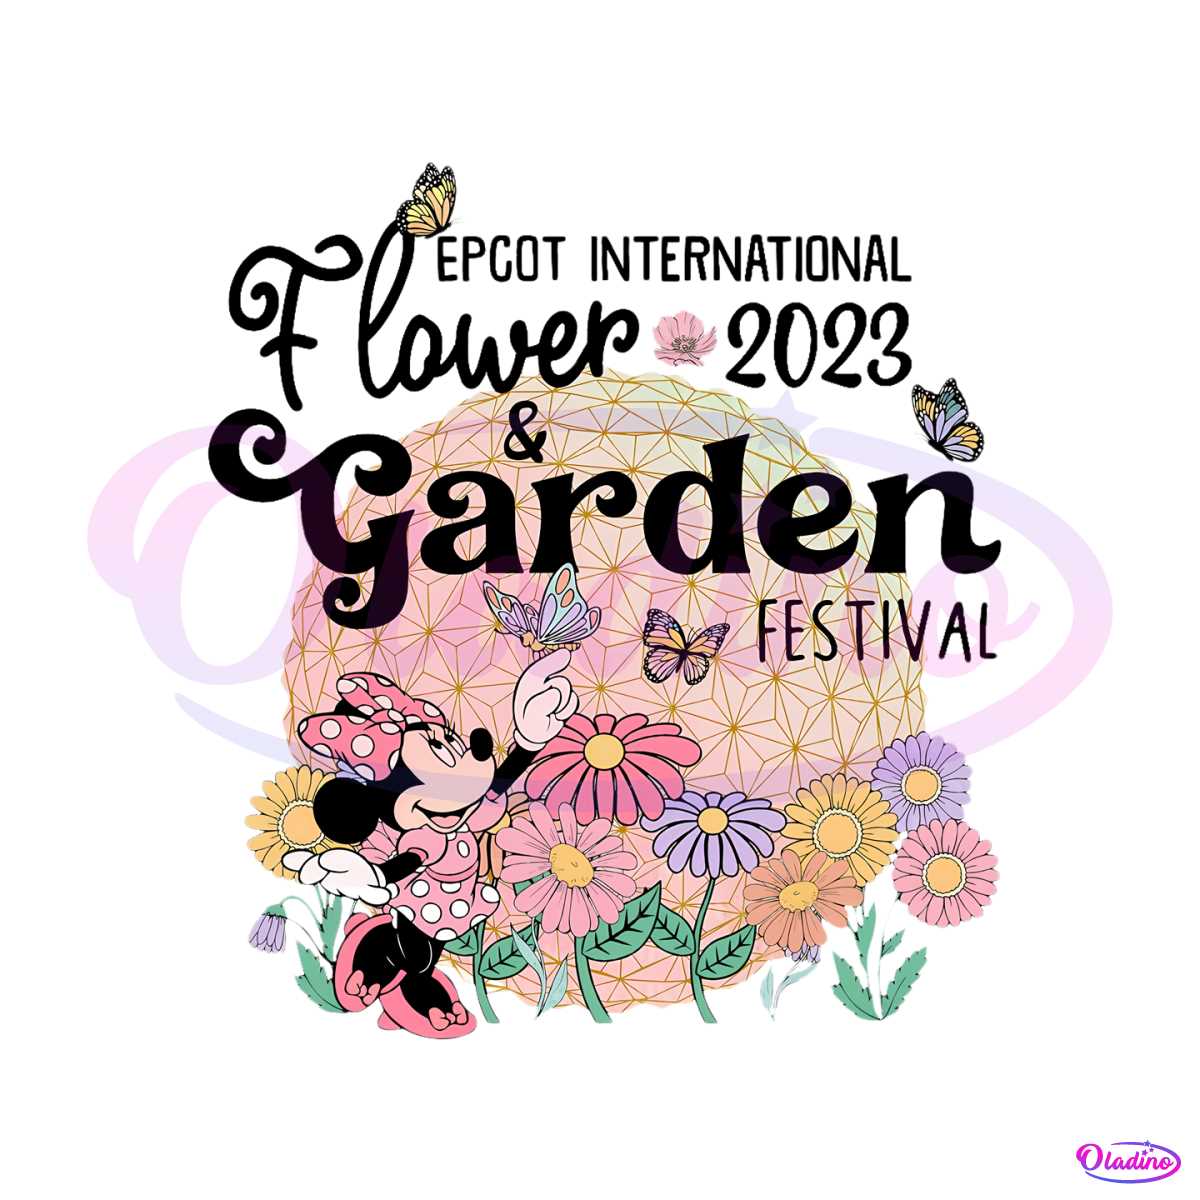 minnie-mouse-disney-epcot-international-flower-and-garden-2023-festival-png